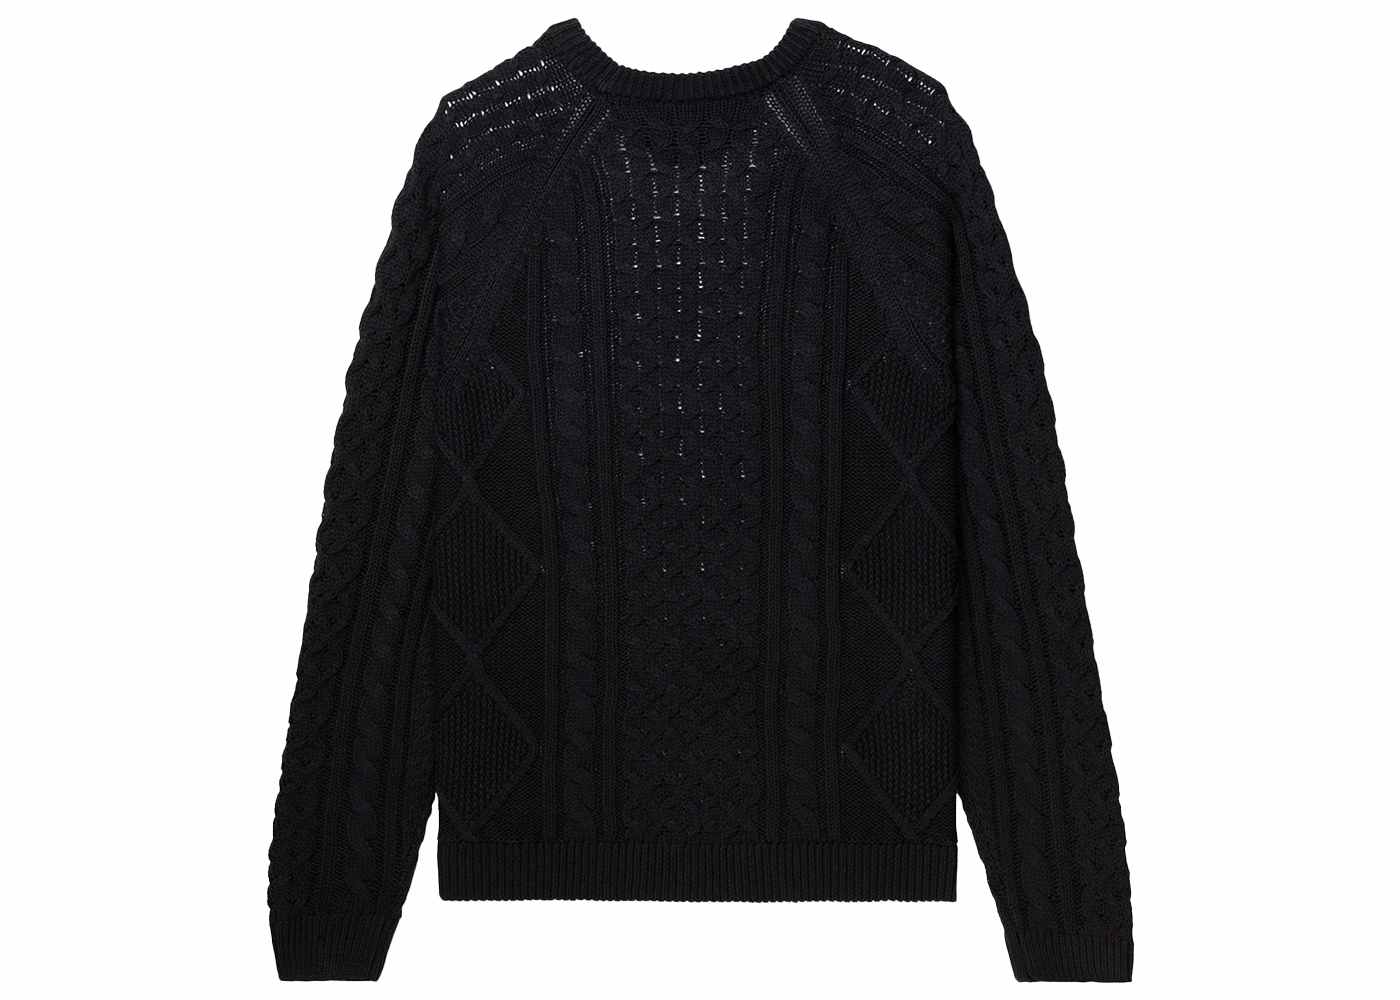 Nike Cable Knit L/S Sweater (US Sizing) Black